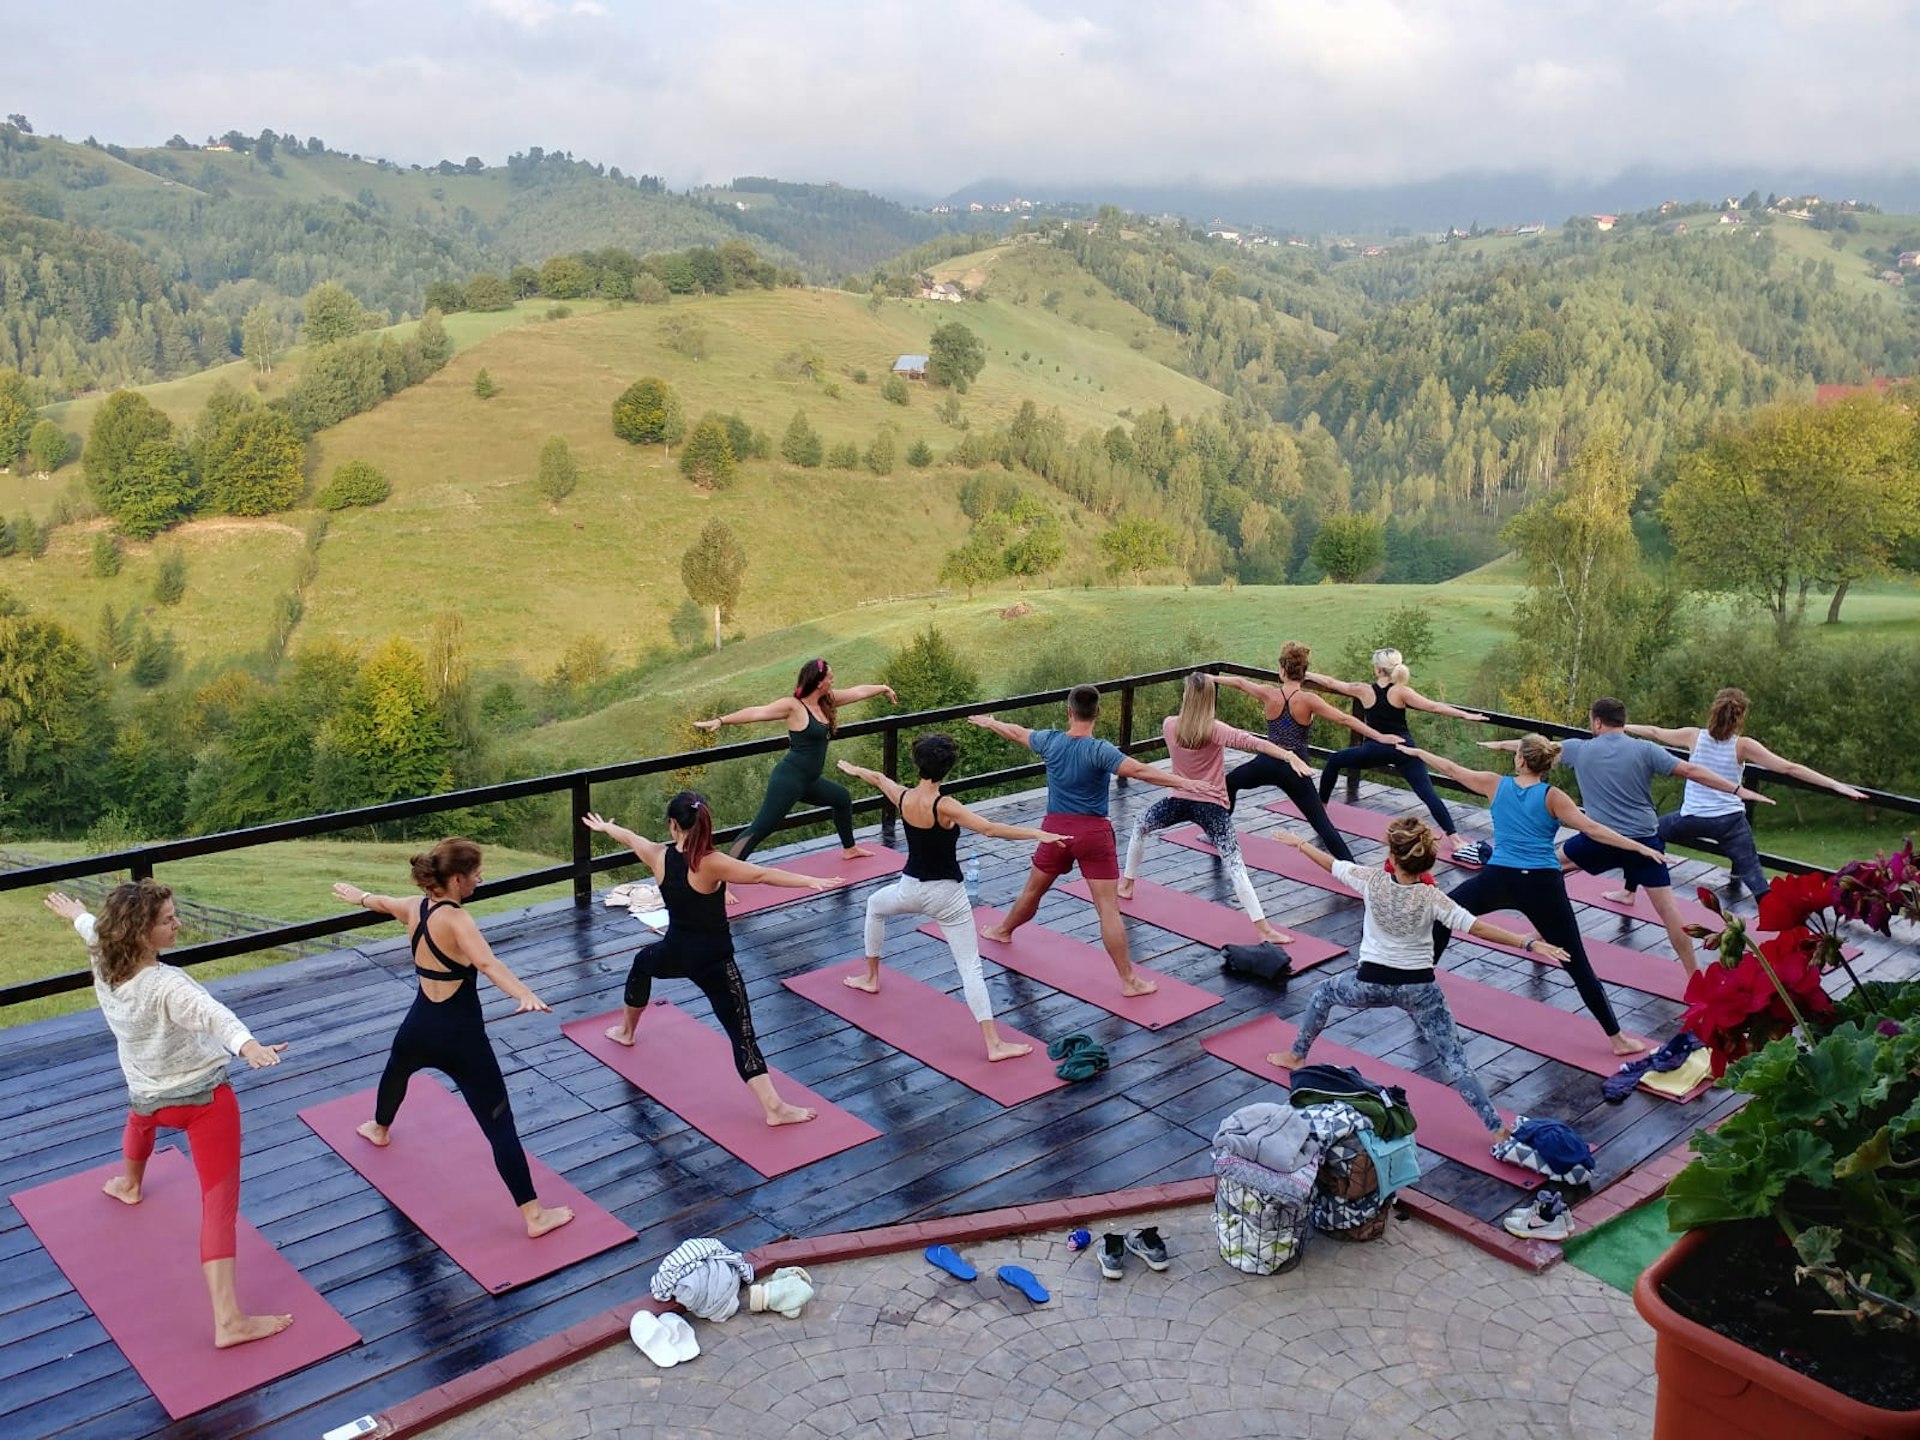 An outdoor yoga class taking place on a terrace overlooking a scenic landscape with rolling hills and trees, with the participants on yoga mats in various poses